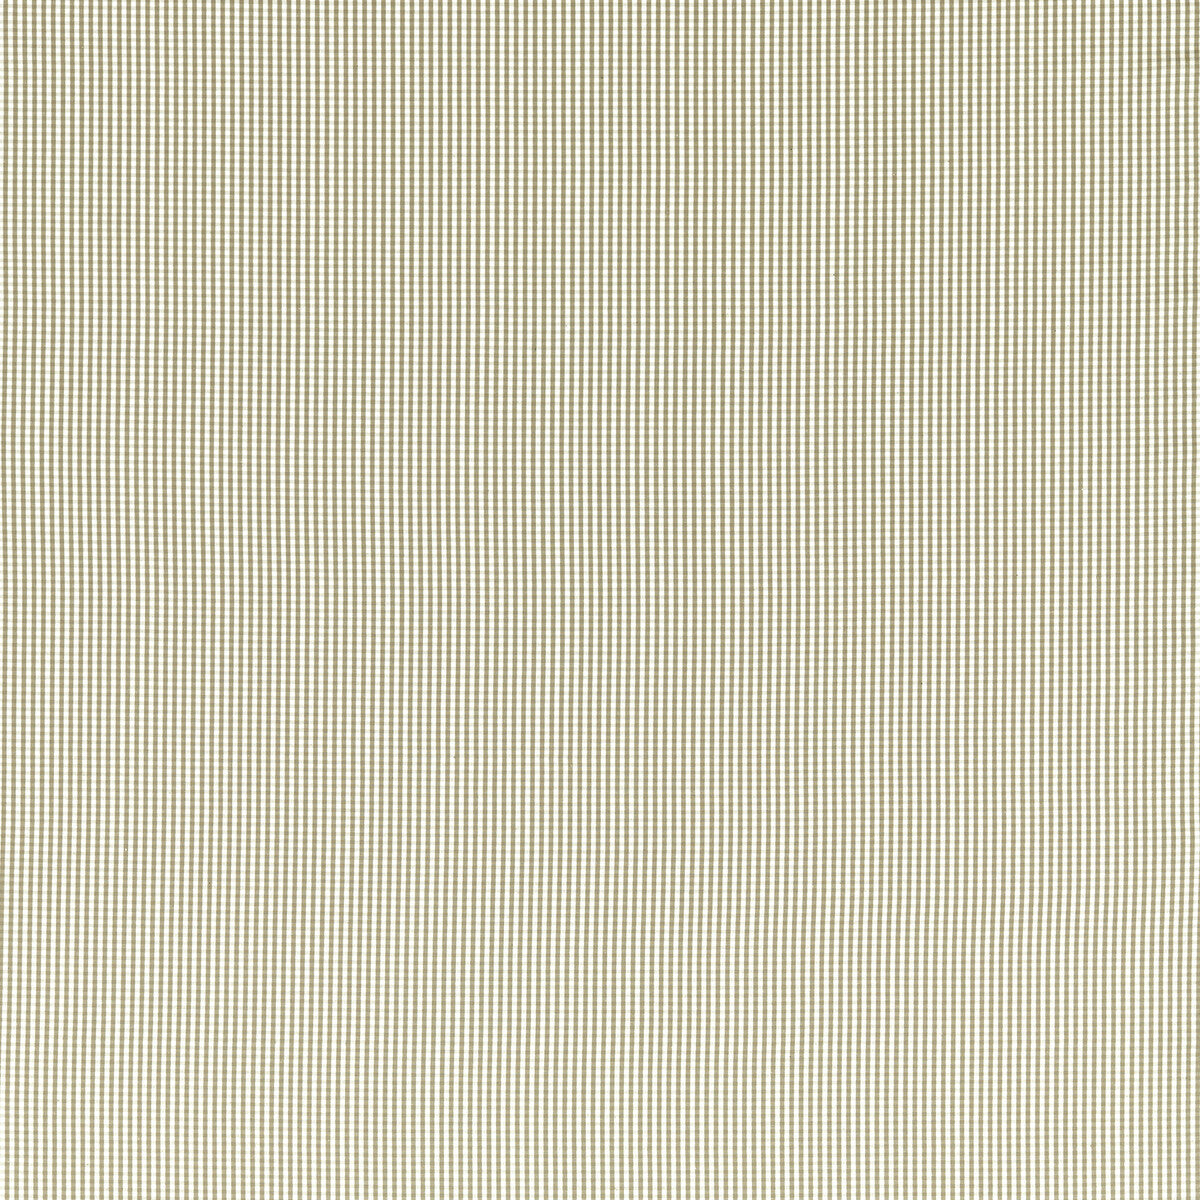 Windsor fabric in linen color - pattern F1505/05.CAC.0 - by Clarke And Clarke in the Clarke &amp; Clarke Edgeworth collection